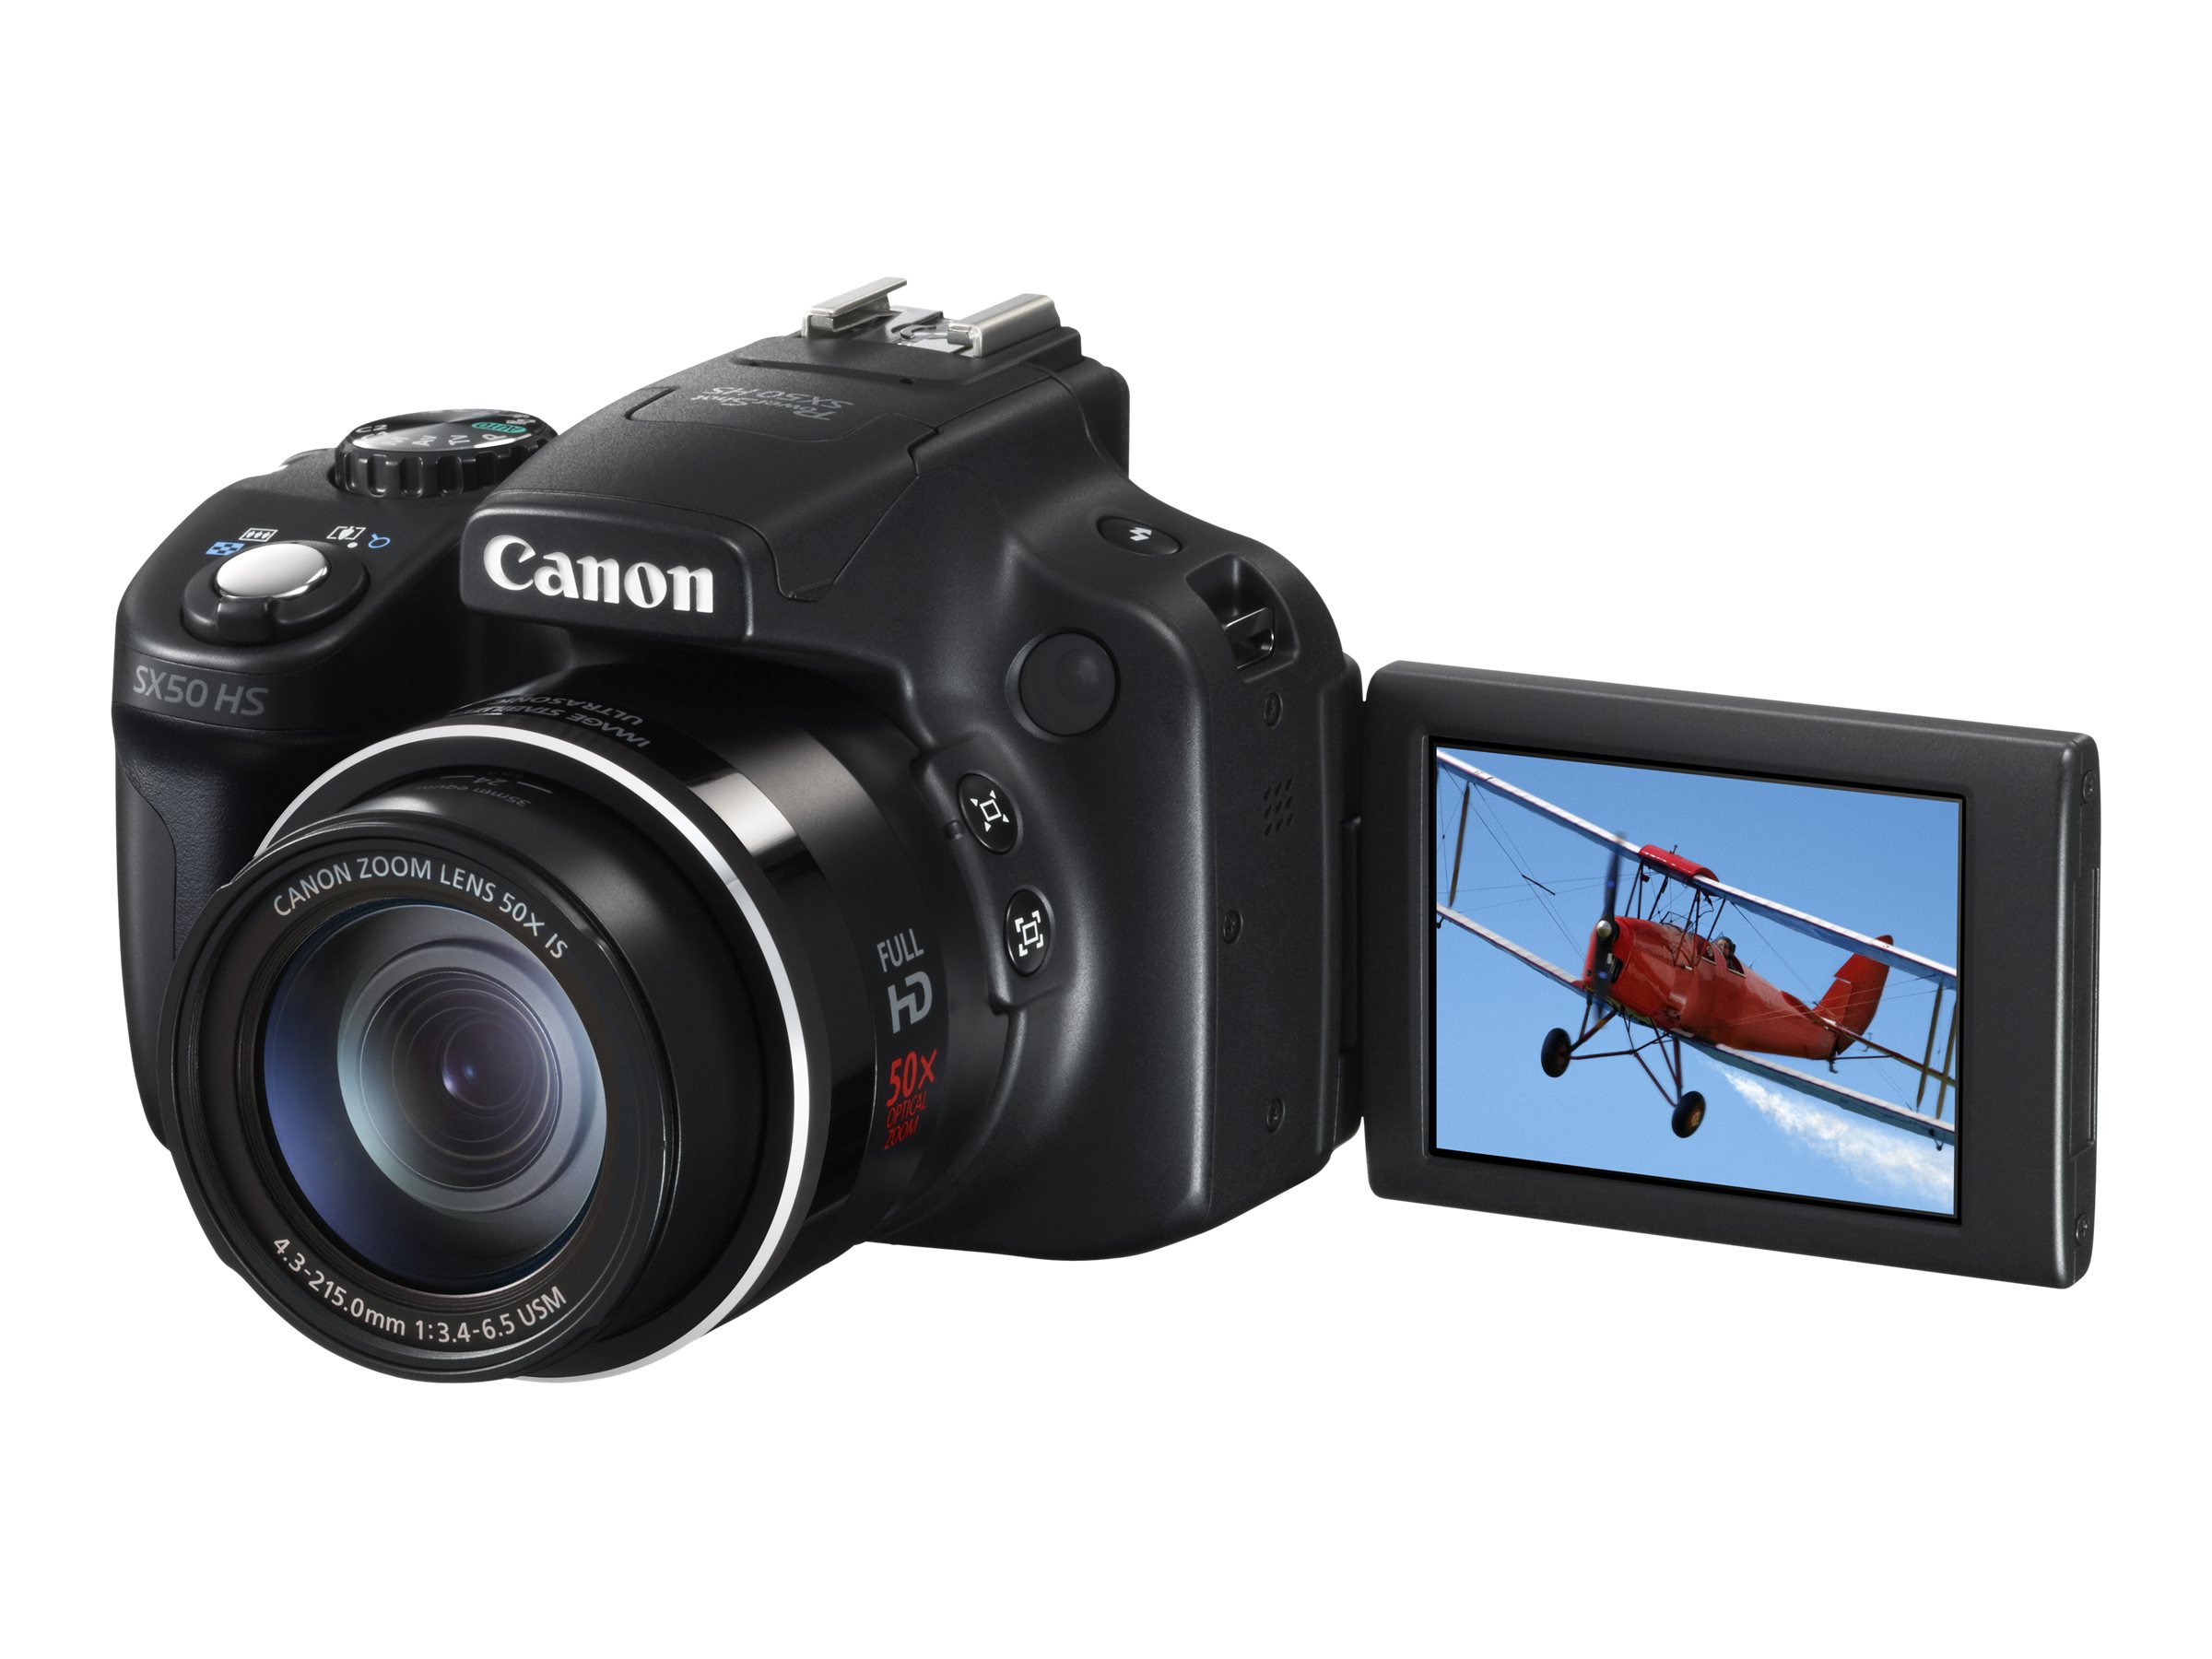 Canon PowerShot SX50 HS - Digital camera - compact - 12.1 MP - 1080p - 50x optical zoom - image 2 of 15